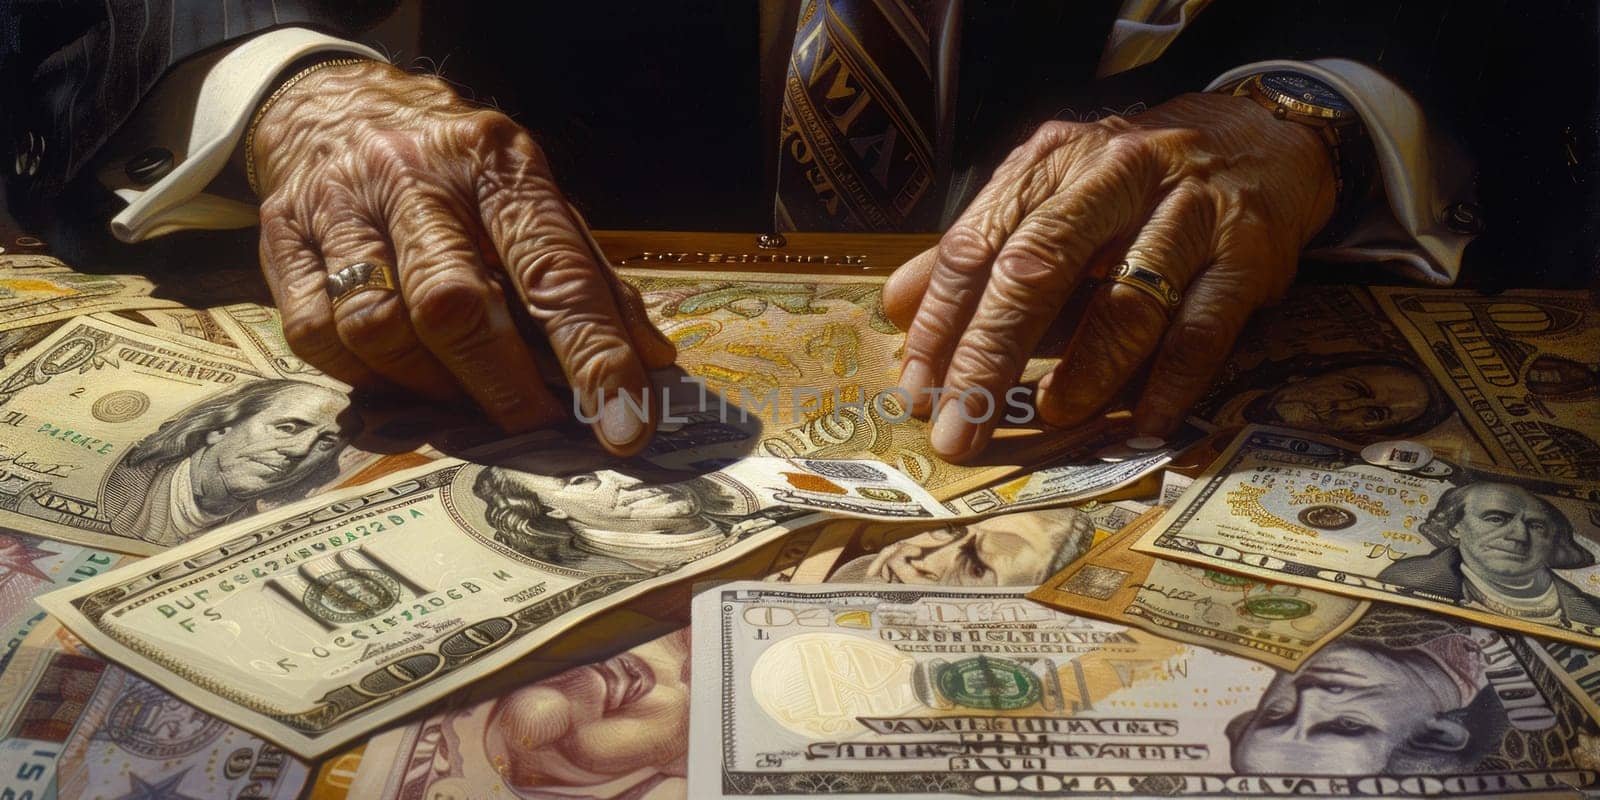 A person joyfully embraces a pile of money with their hands, showcasing financial success and abundance.